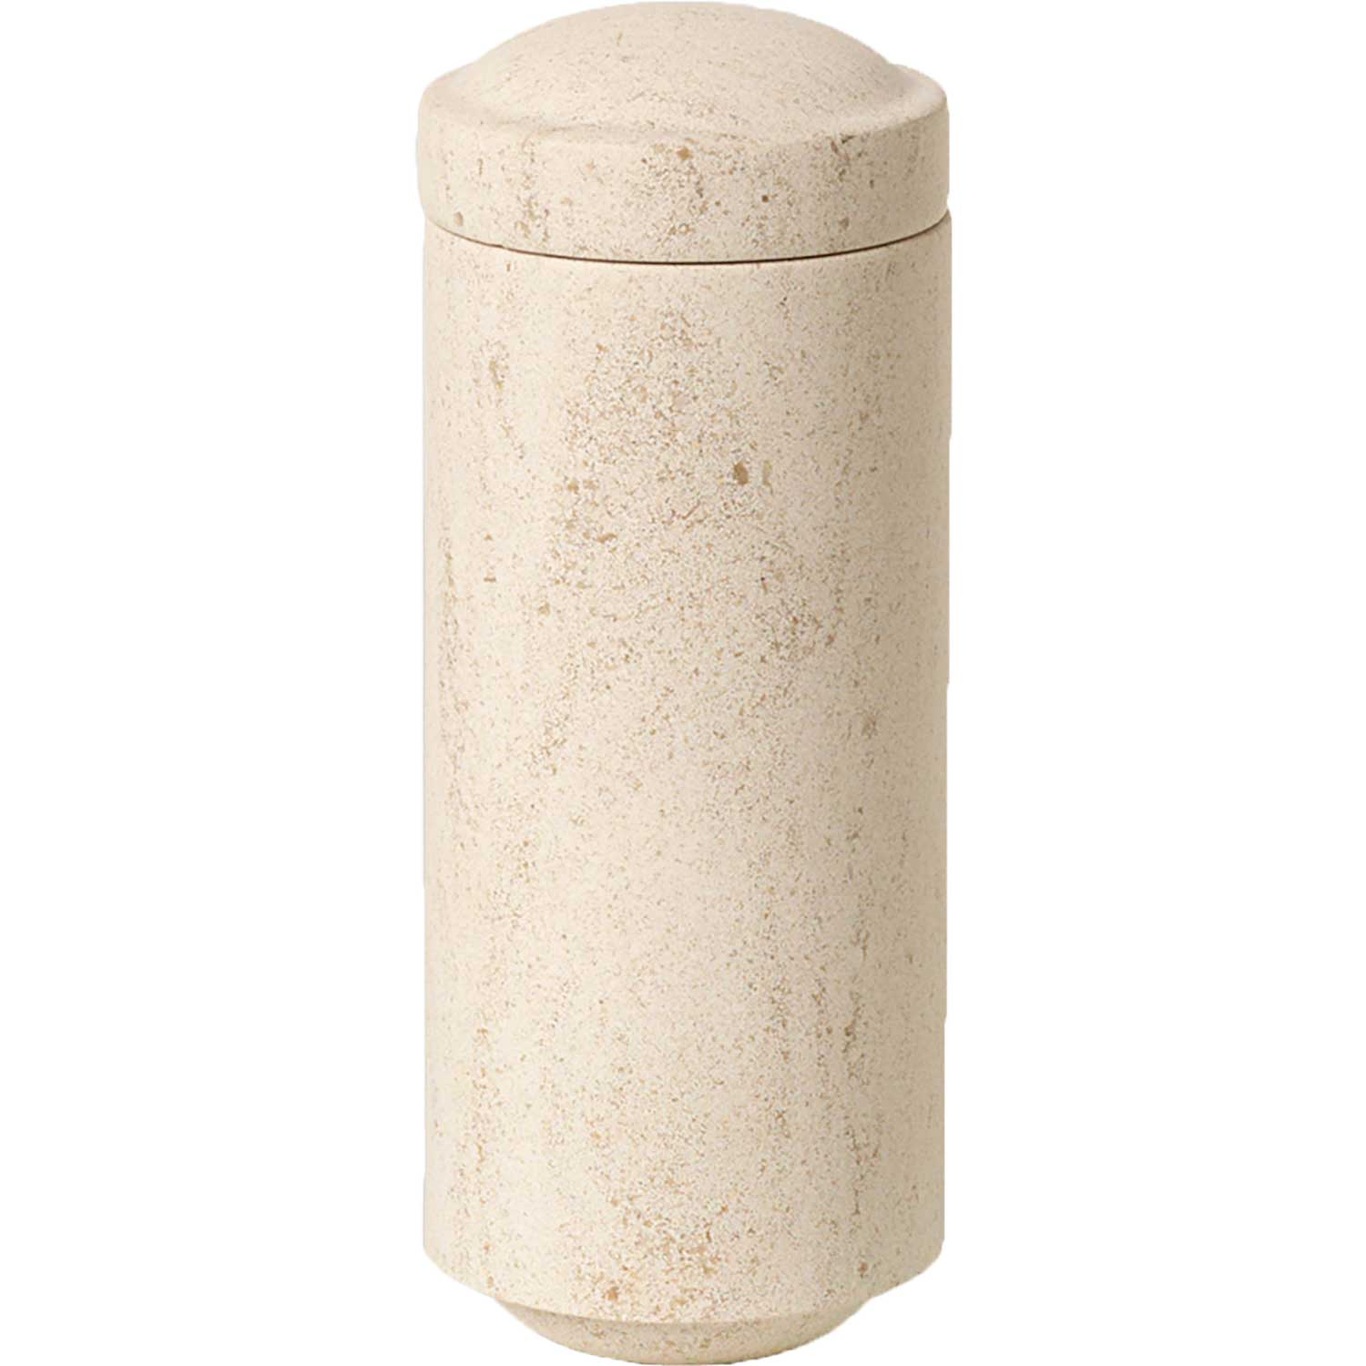 Gallery Objects Jar 18 cm, Lime Stone